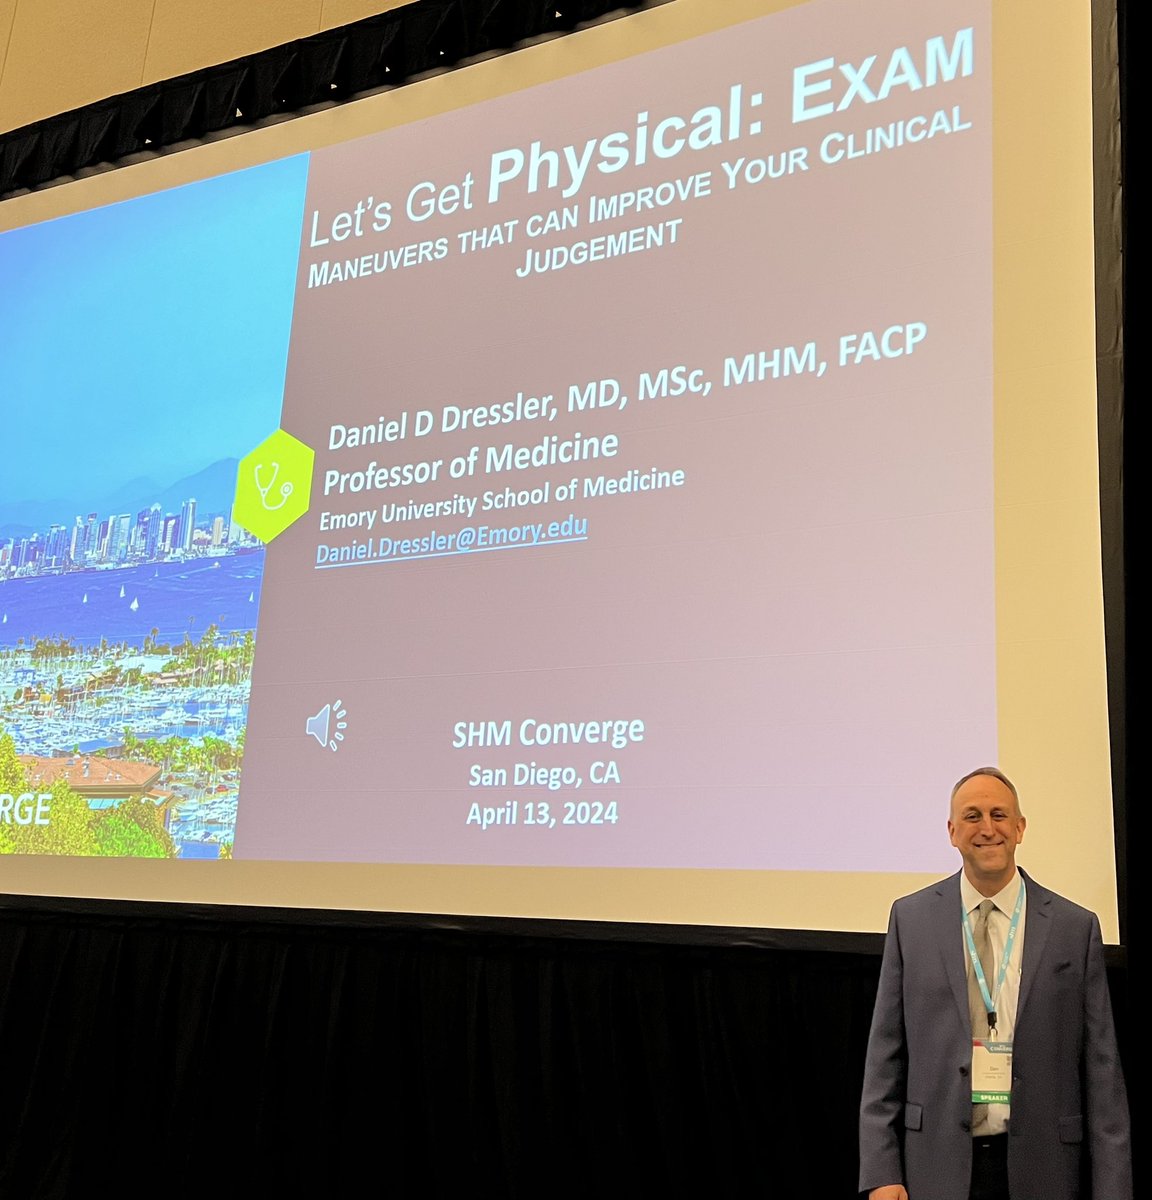 Dan Dressler kicks off his session on high yield physical exam maneuvers for hospitalists! #WeAreEHM